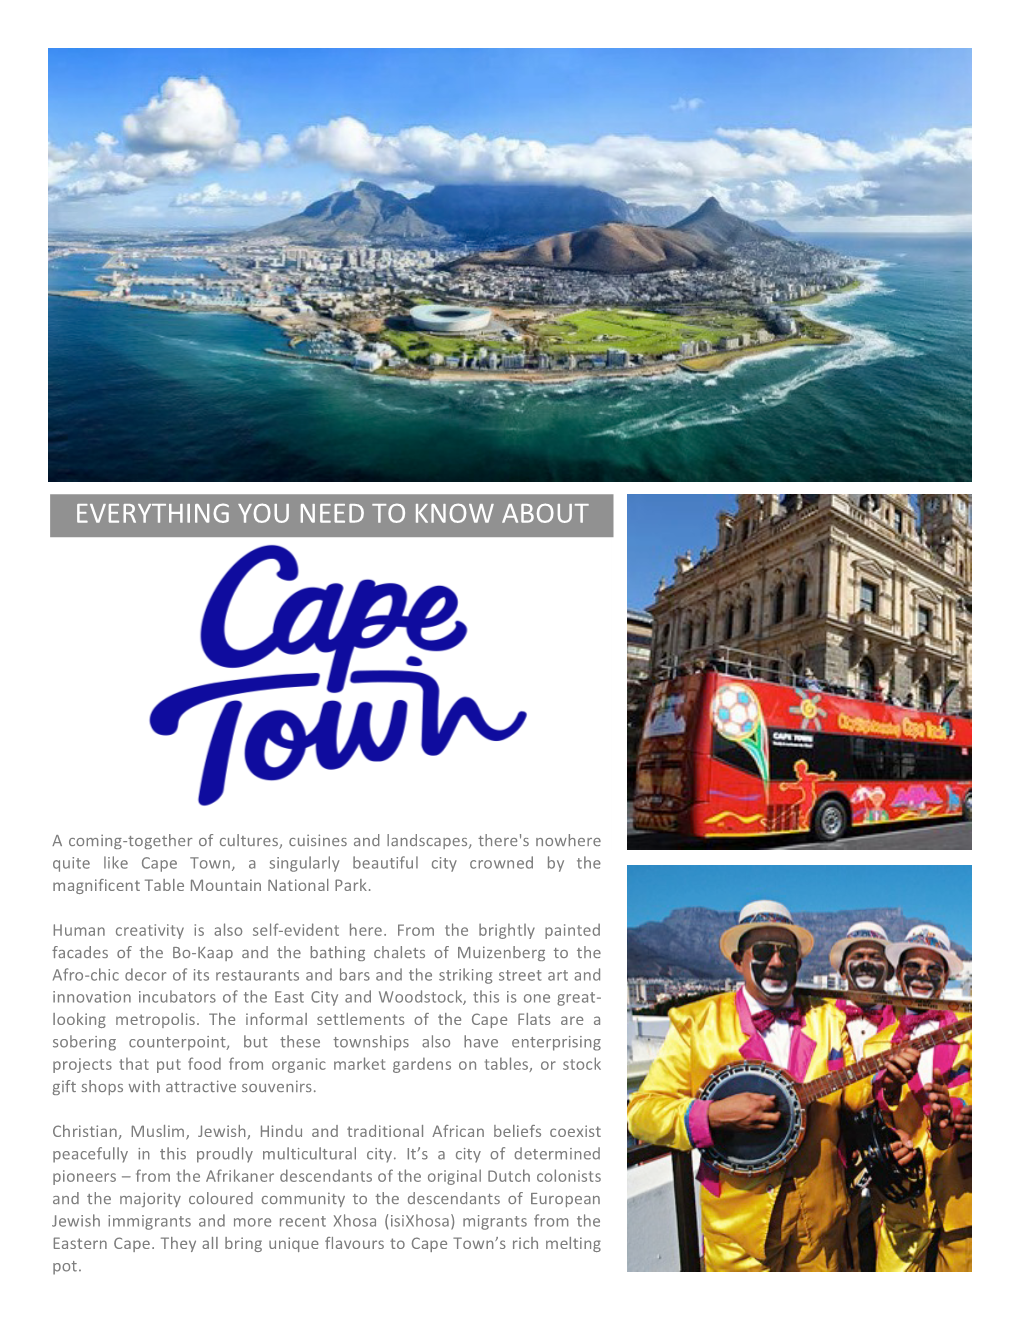 Cape Town Information